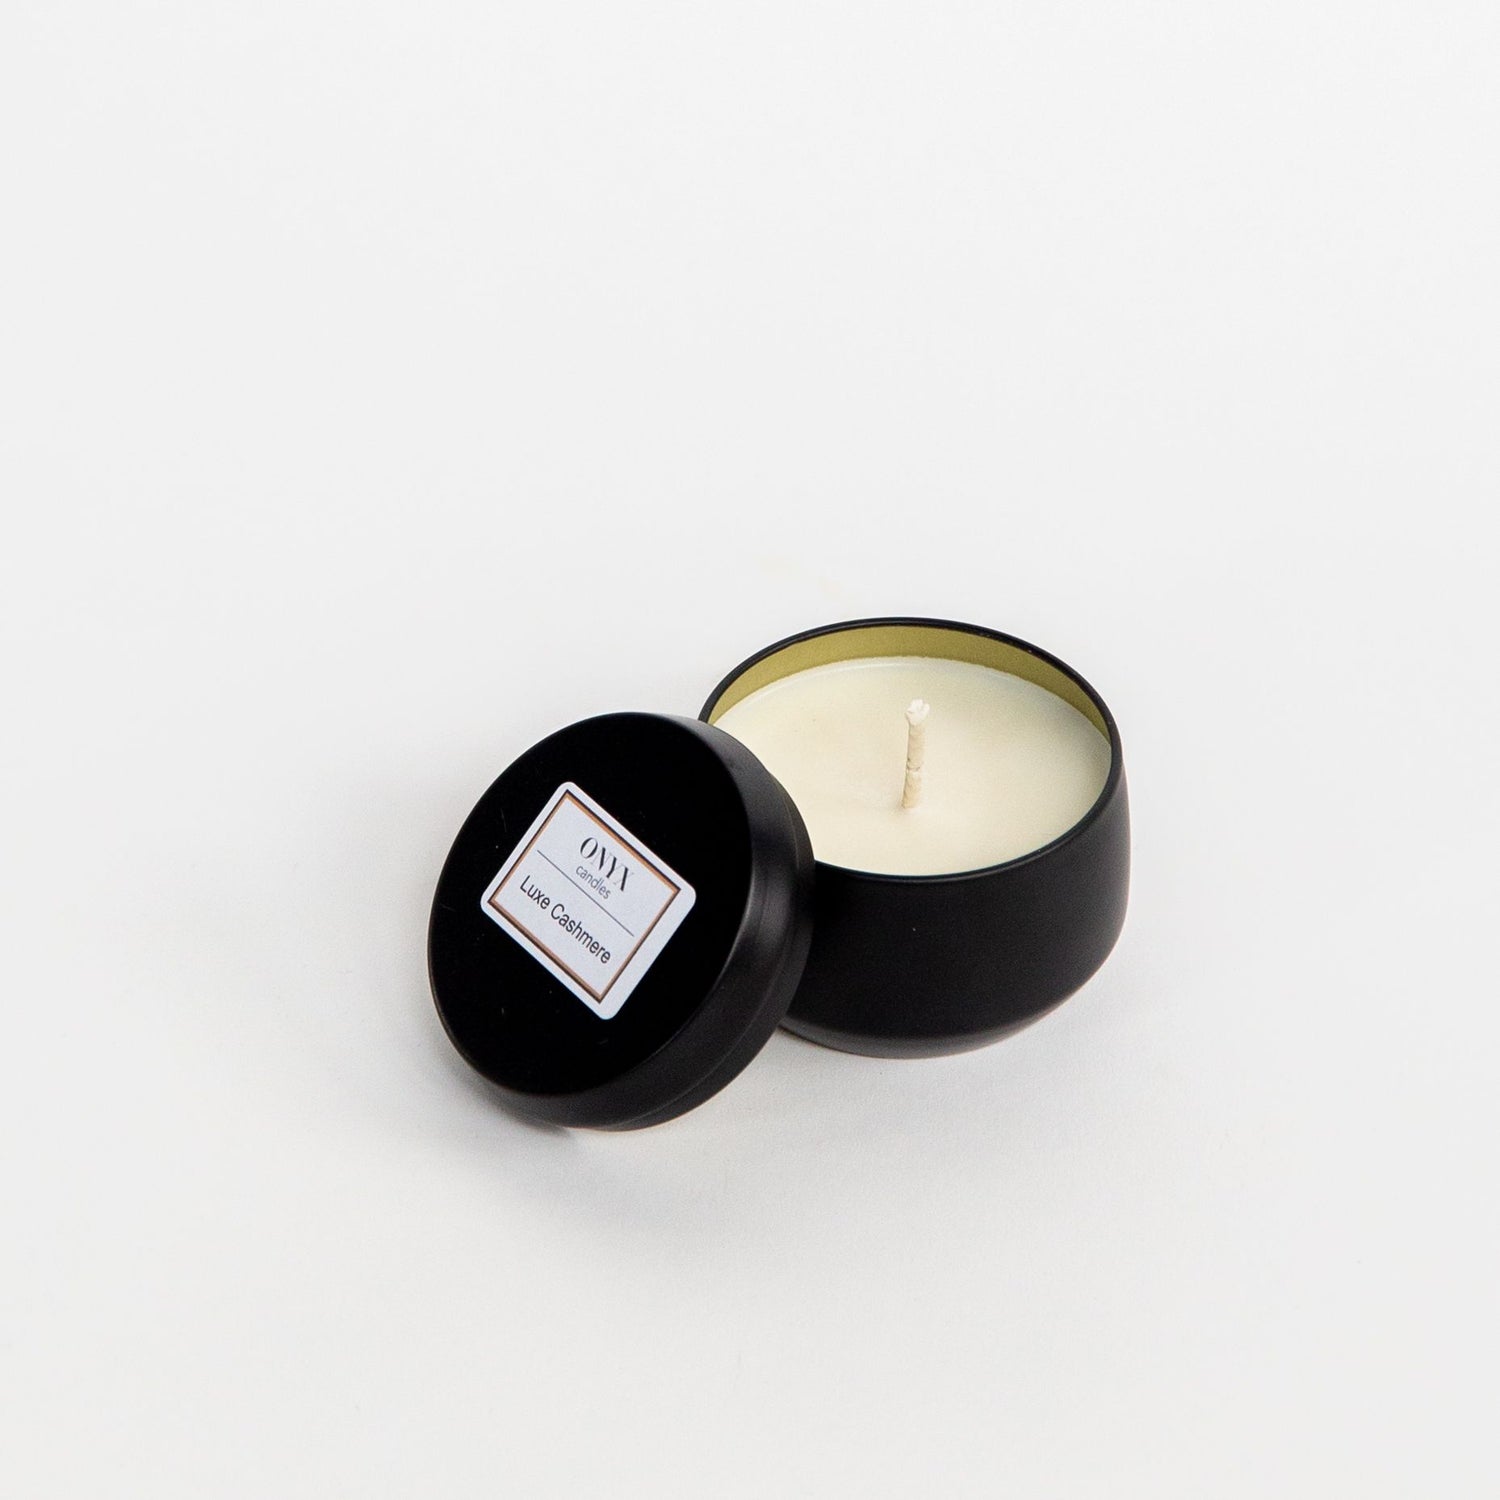 Pictured is the Luxe Cashmere scented candle in a 4 oz matte black tin